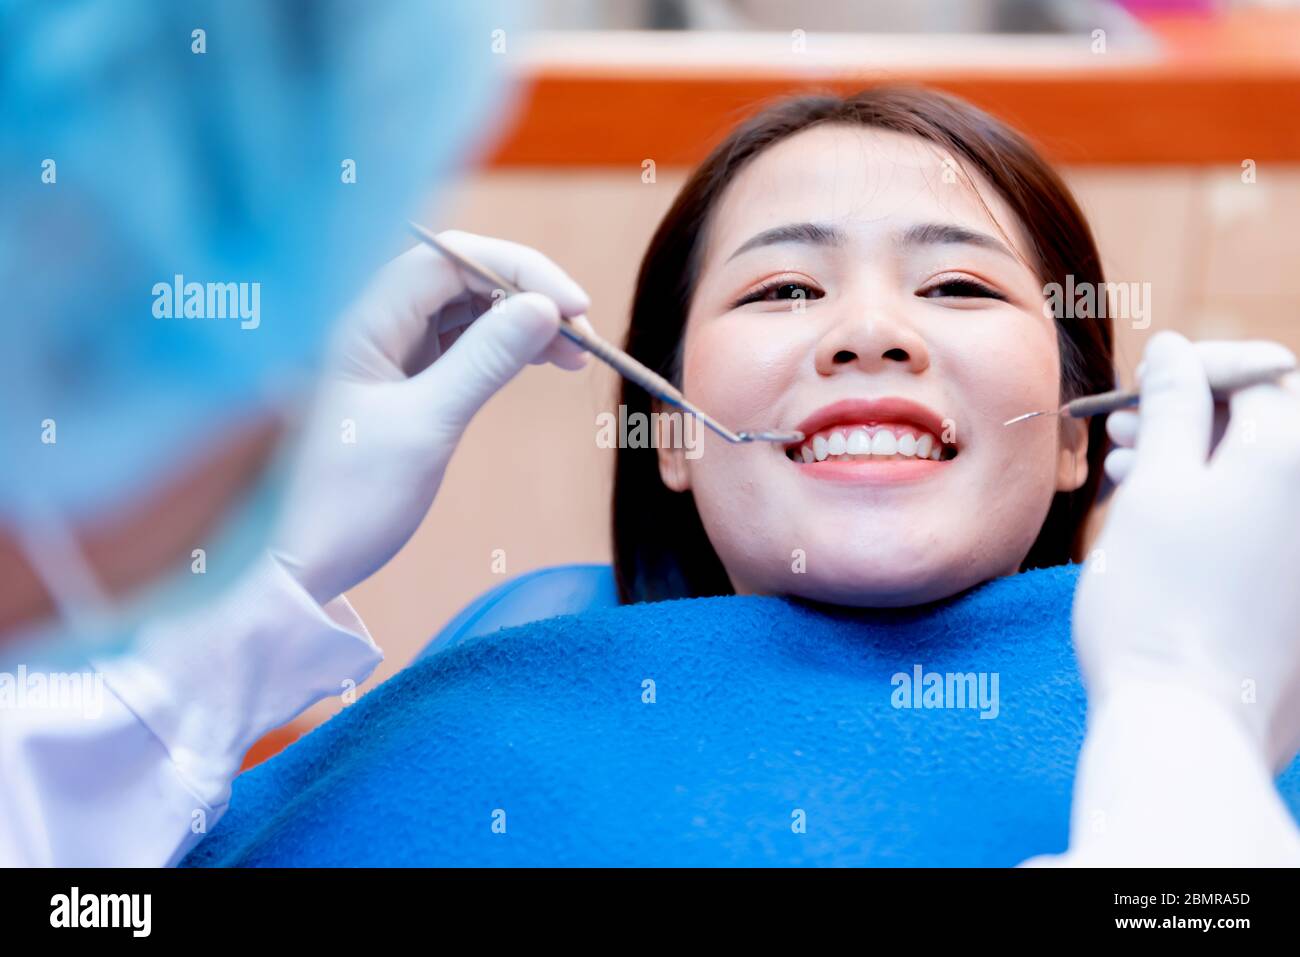 Dentistry and teeth healthcare concept at dental clinic. Dentist check-up teeth for young asian patient. Stock Photo